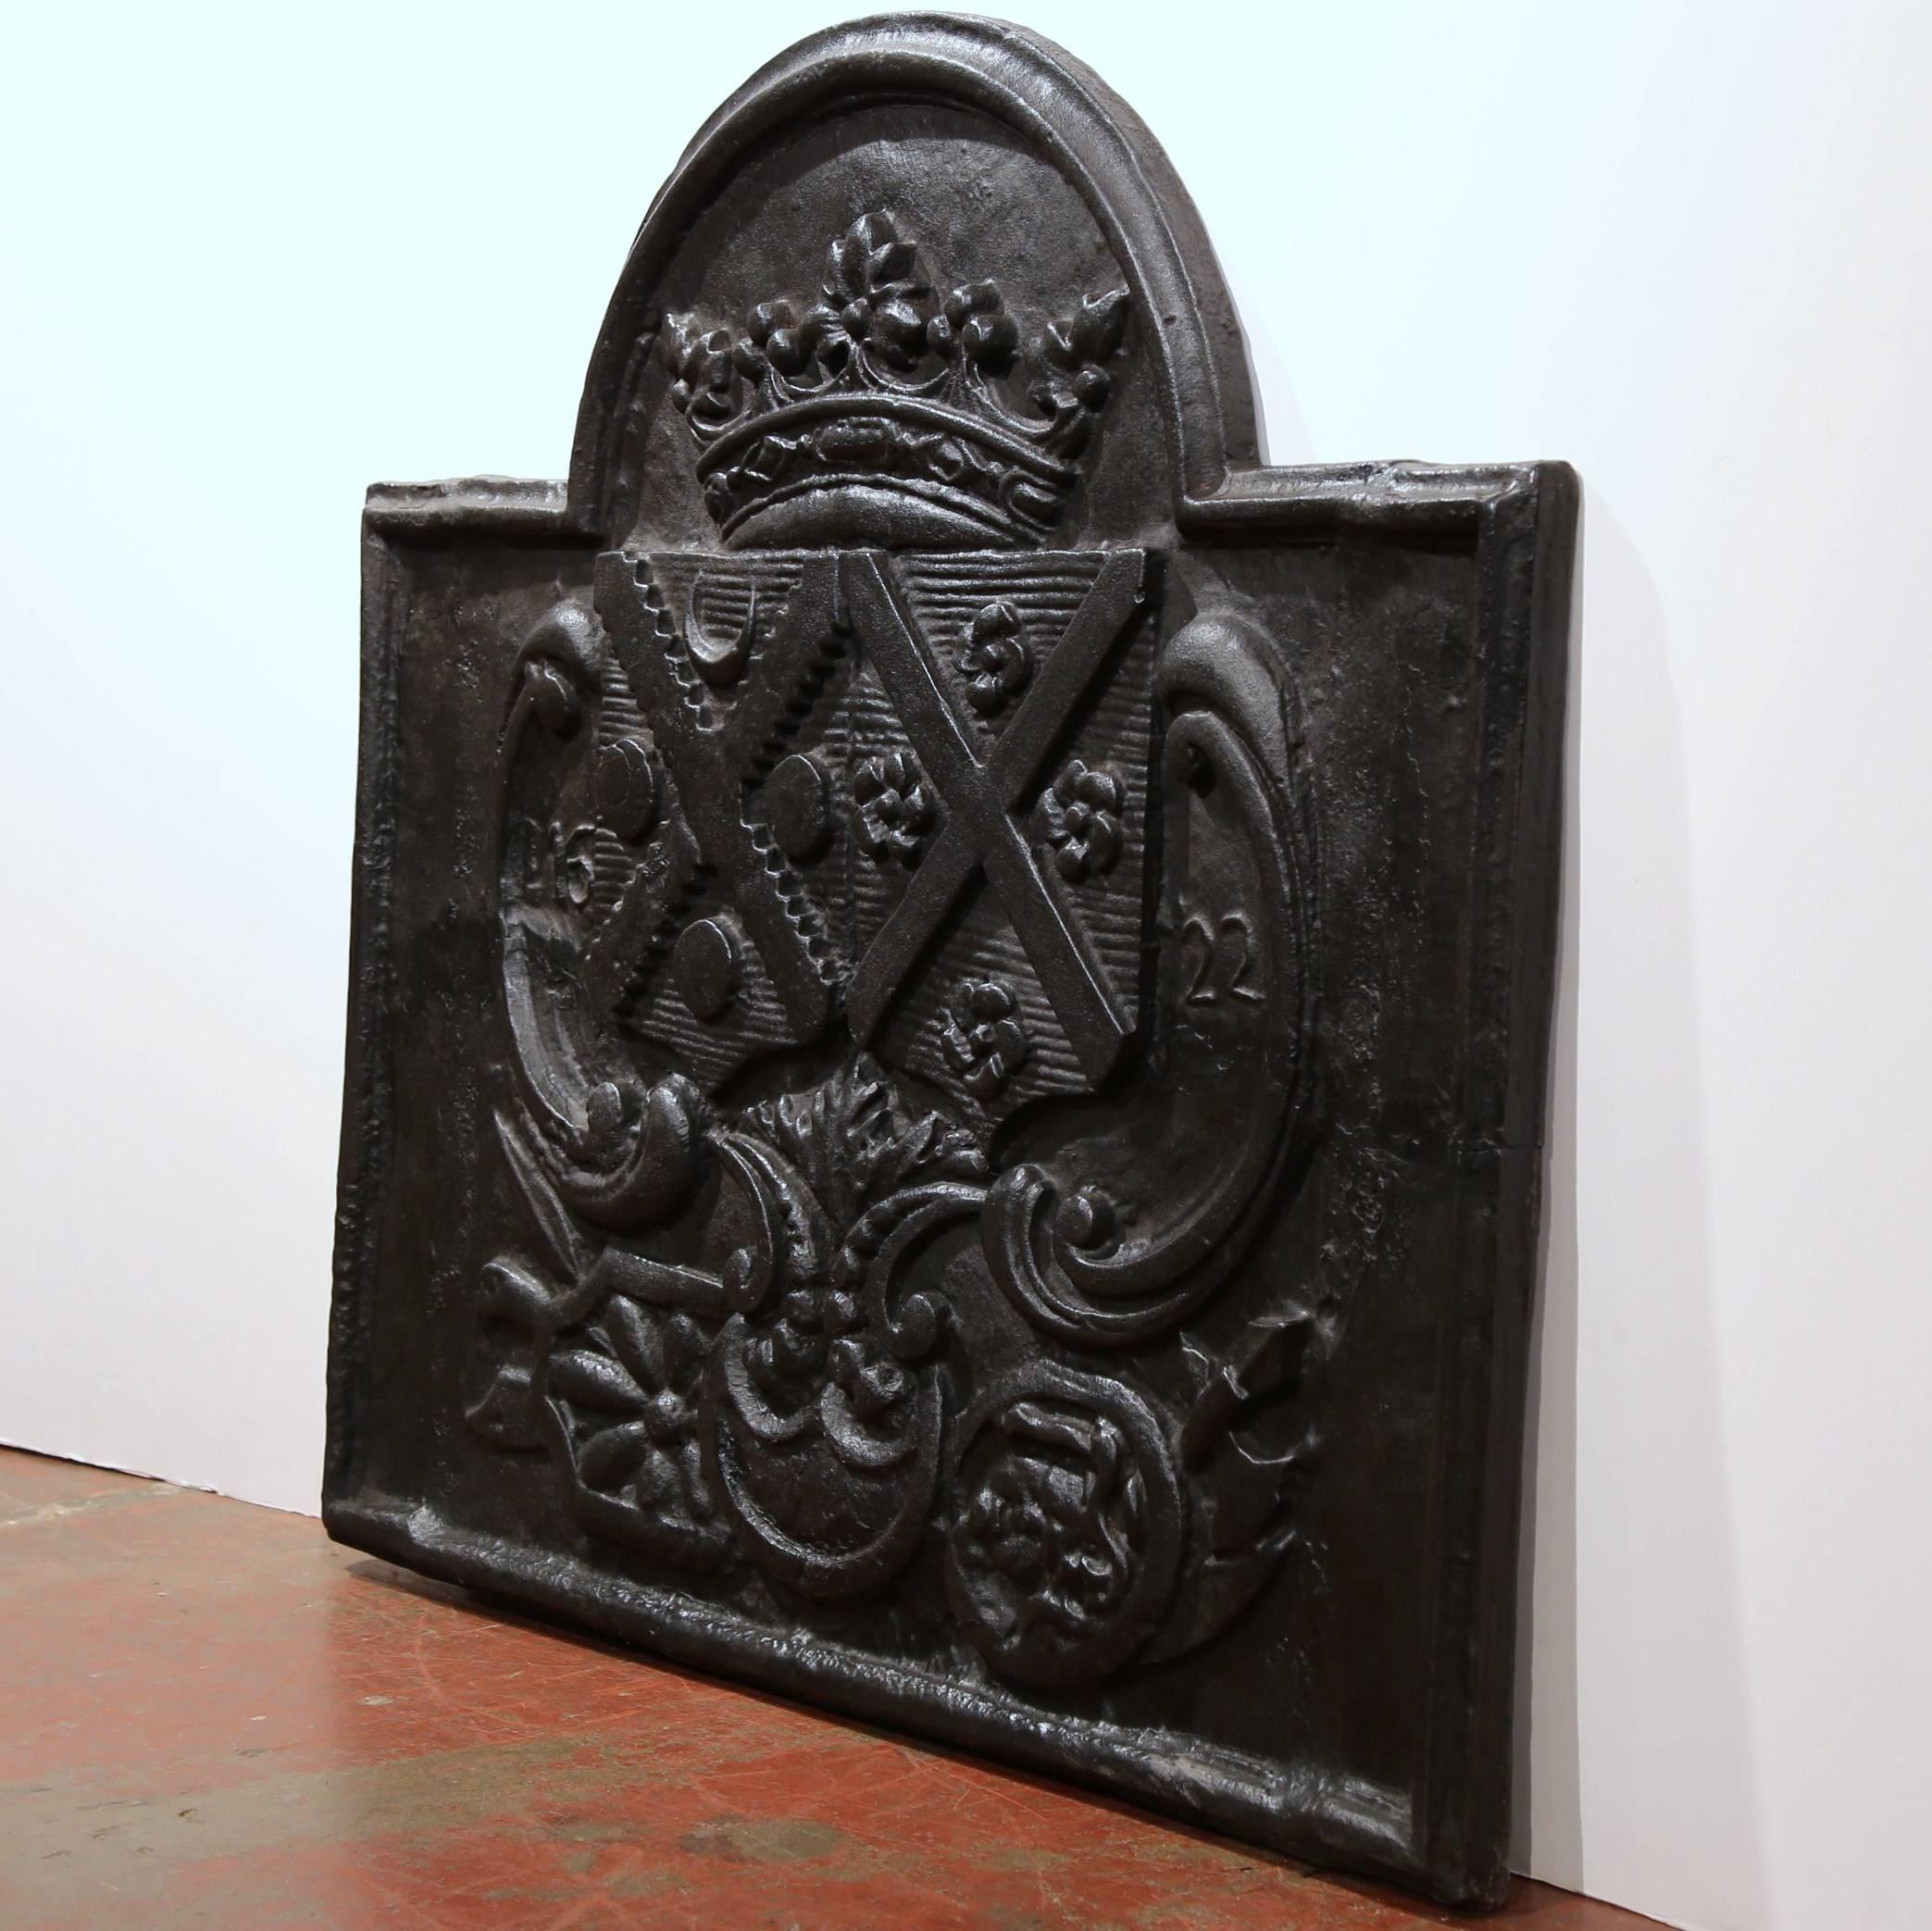 Monumental iron fire back from the Perigord Region (Southwest France), dated 1622, featuring a "couronne de Marquis" (Marquis' crown) with coat of arms of 2 families.
This is the alliance of Thomas d'Armes de Choisy, Marquis of